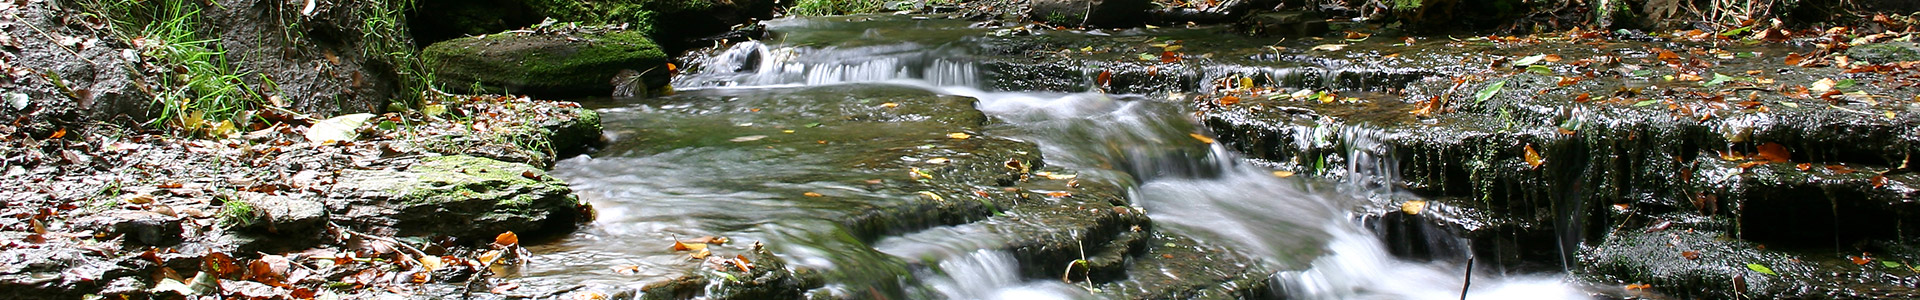 A small waterfall in a stream in the woods